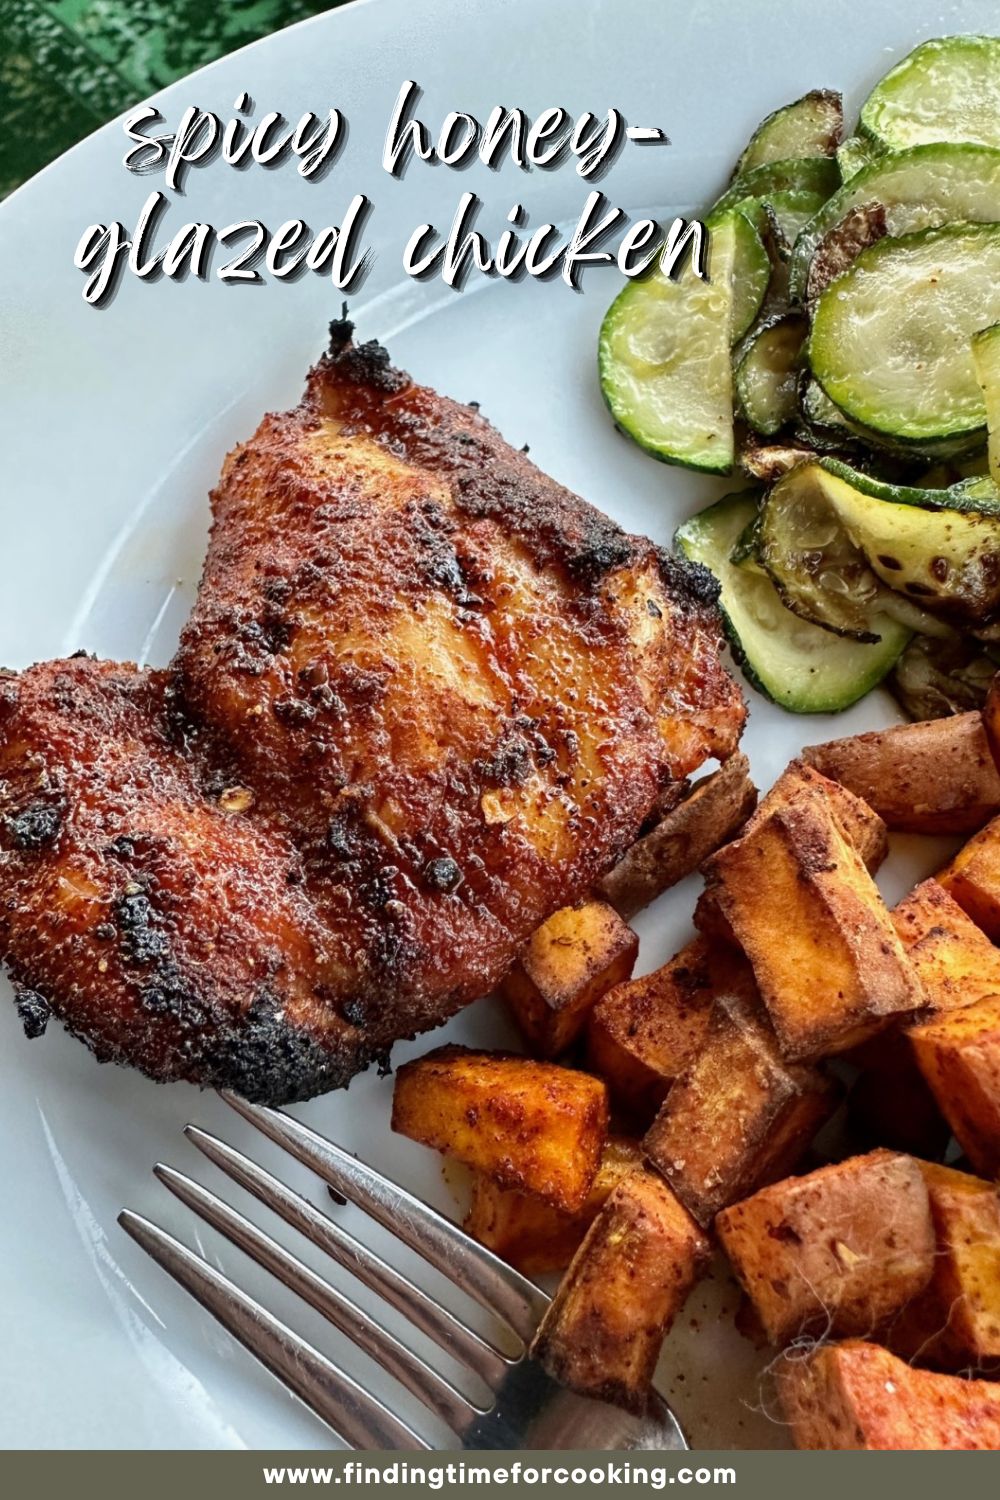 Easy Spicy Honey-Glazed Chicken Thighs | You have got to try these sweet & spicy chicken thighs ASAP! They're easy, healthy, & packed with flavor, a great meal any night of the week. I make them on the grill, but they work in the air fryer or oven as well. An easy healthy dinner option.